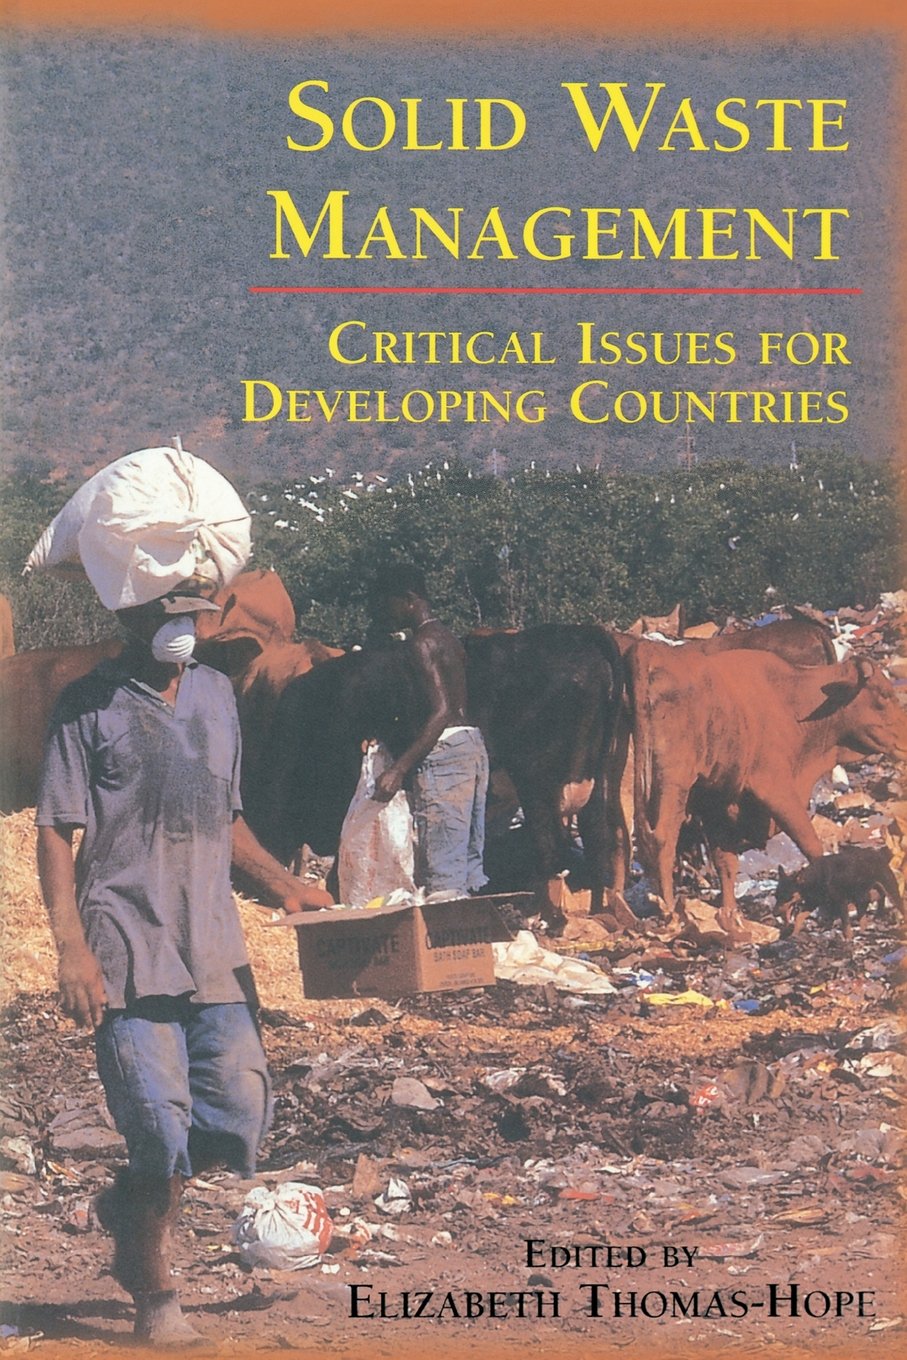 Solid waste management - critical issues for developing countries